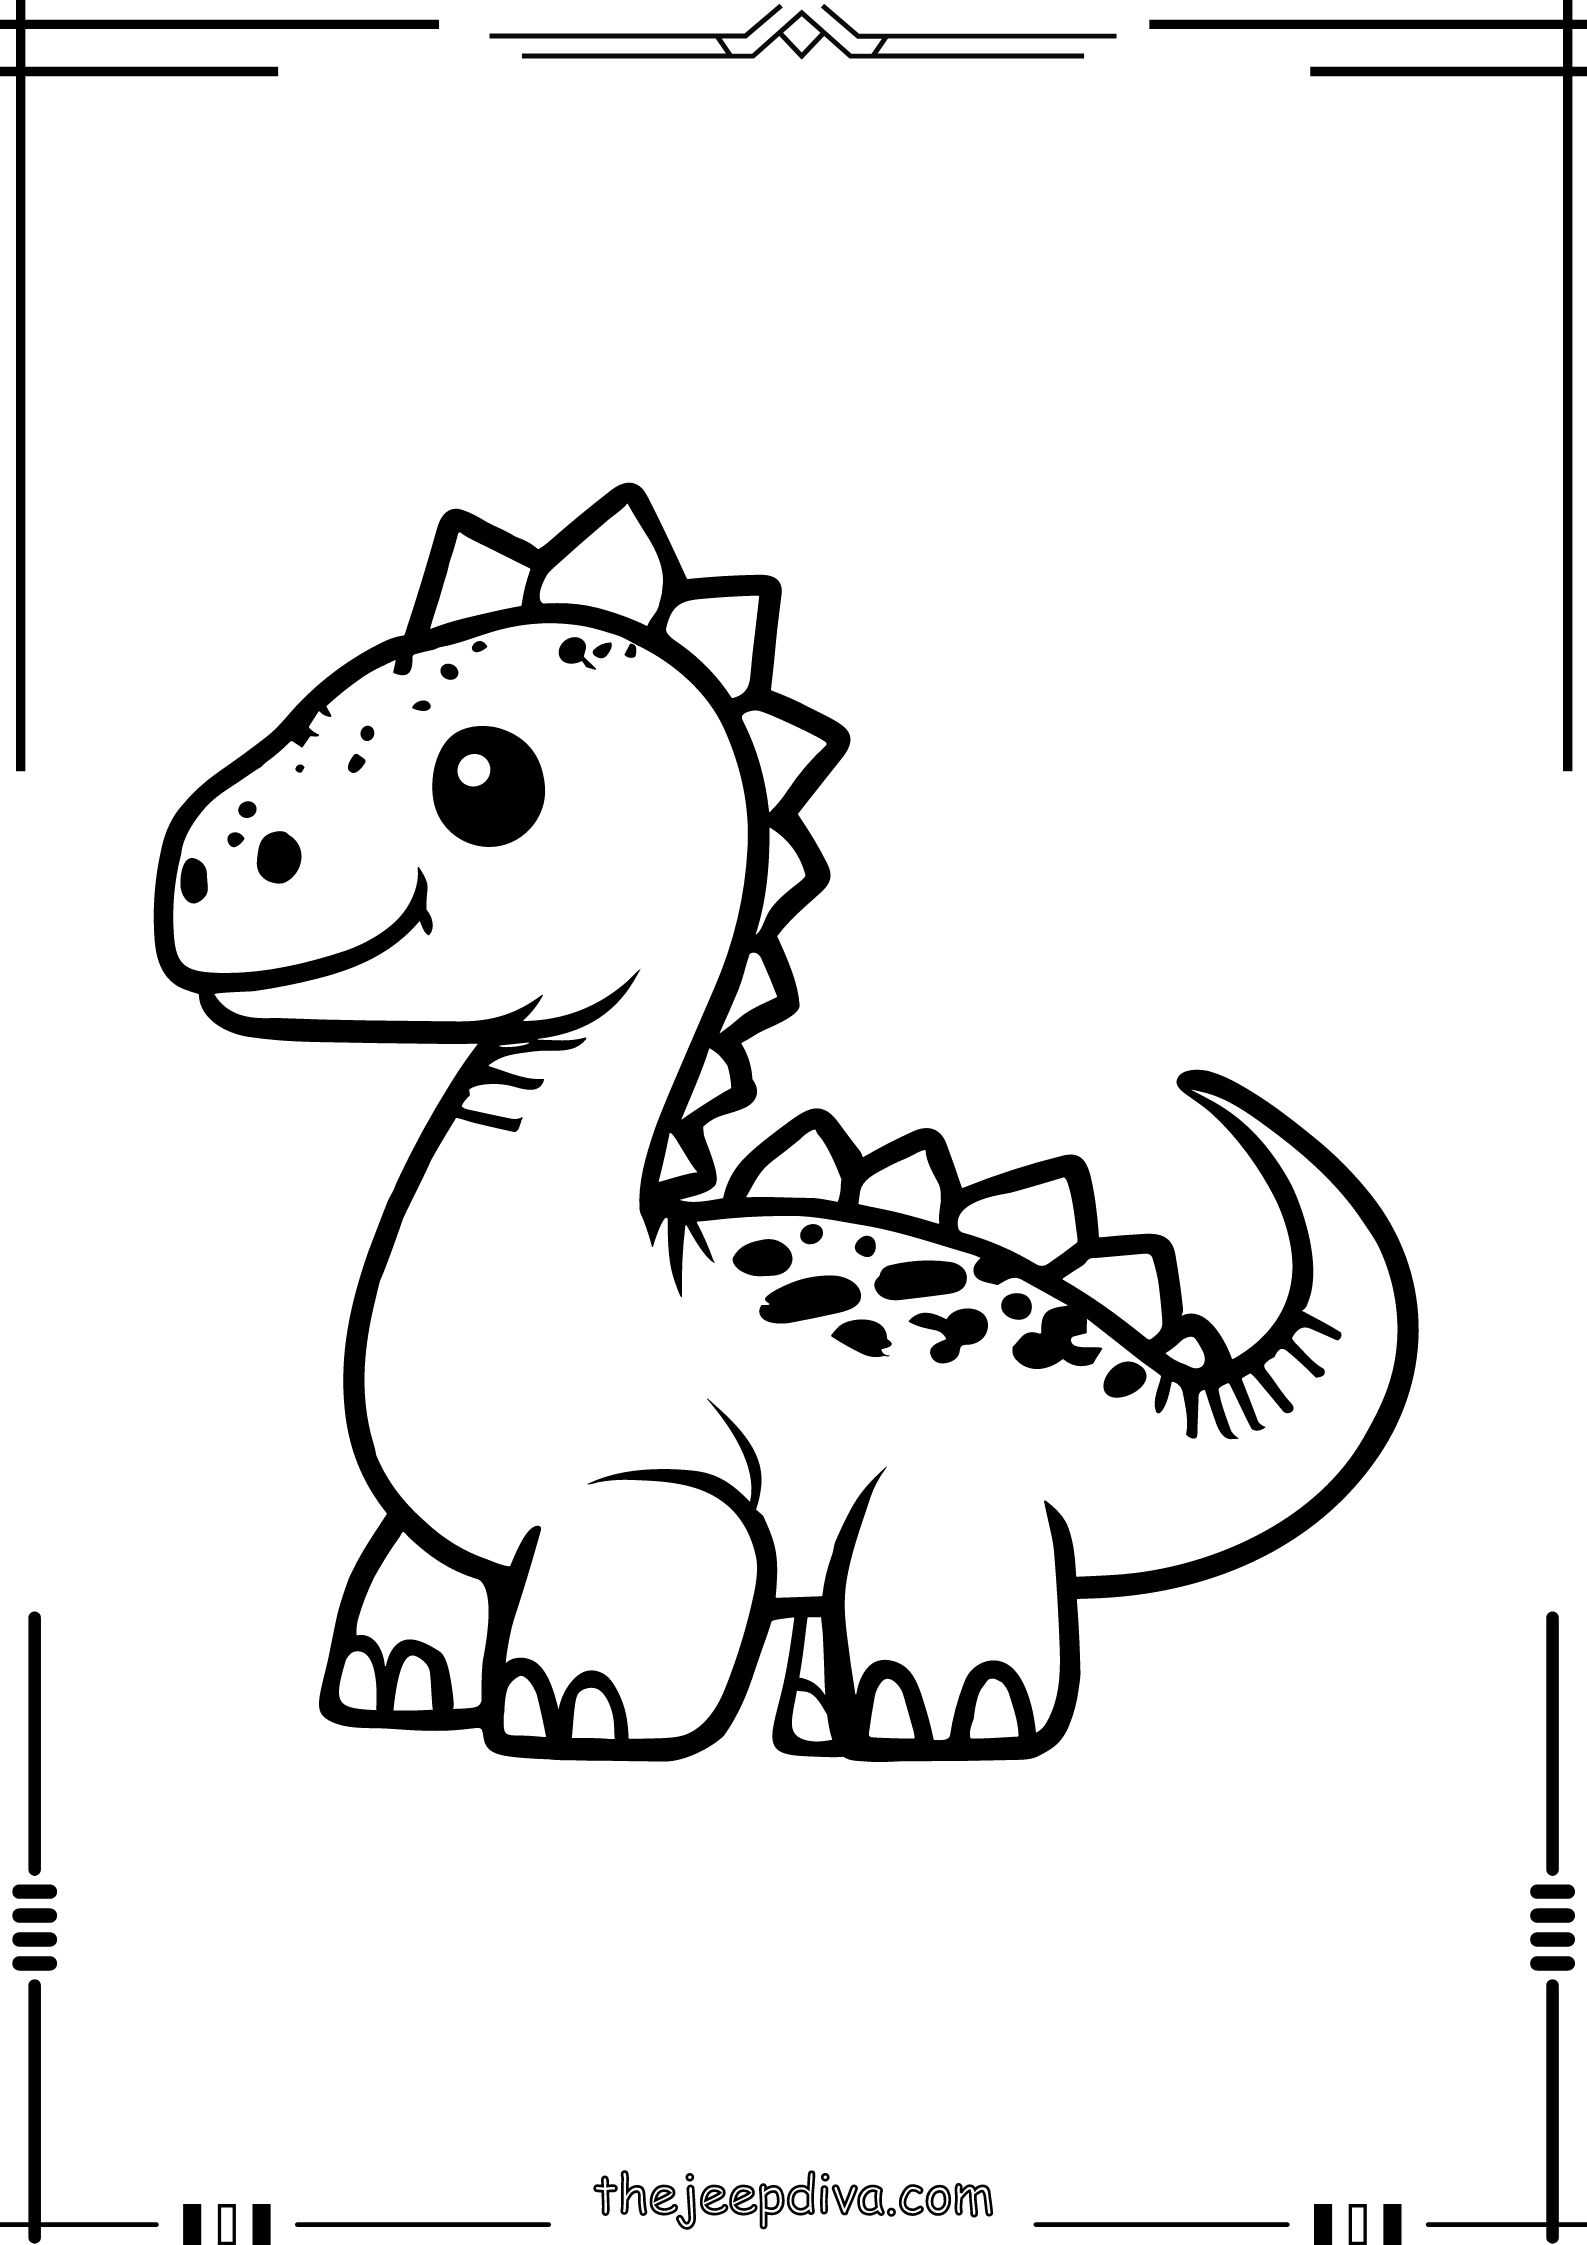 Dinosaur-Colouring-Pages-Easy-3